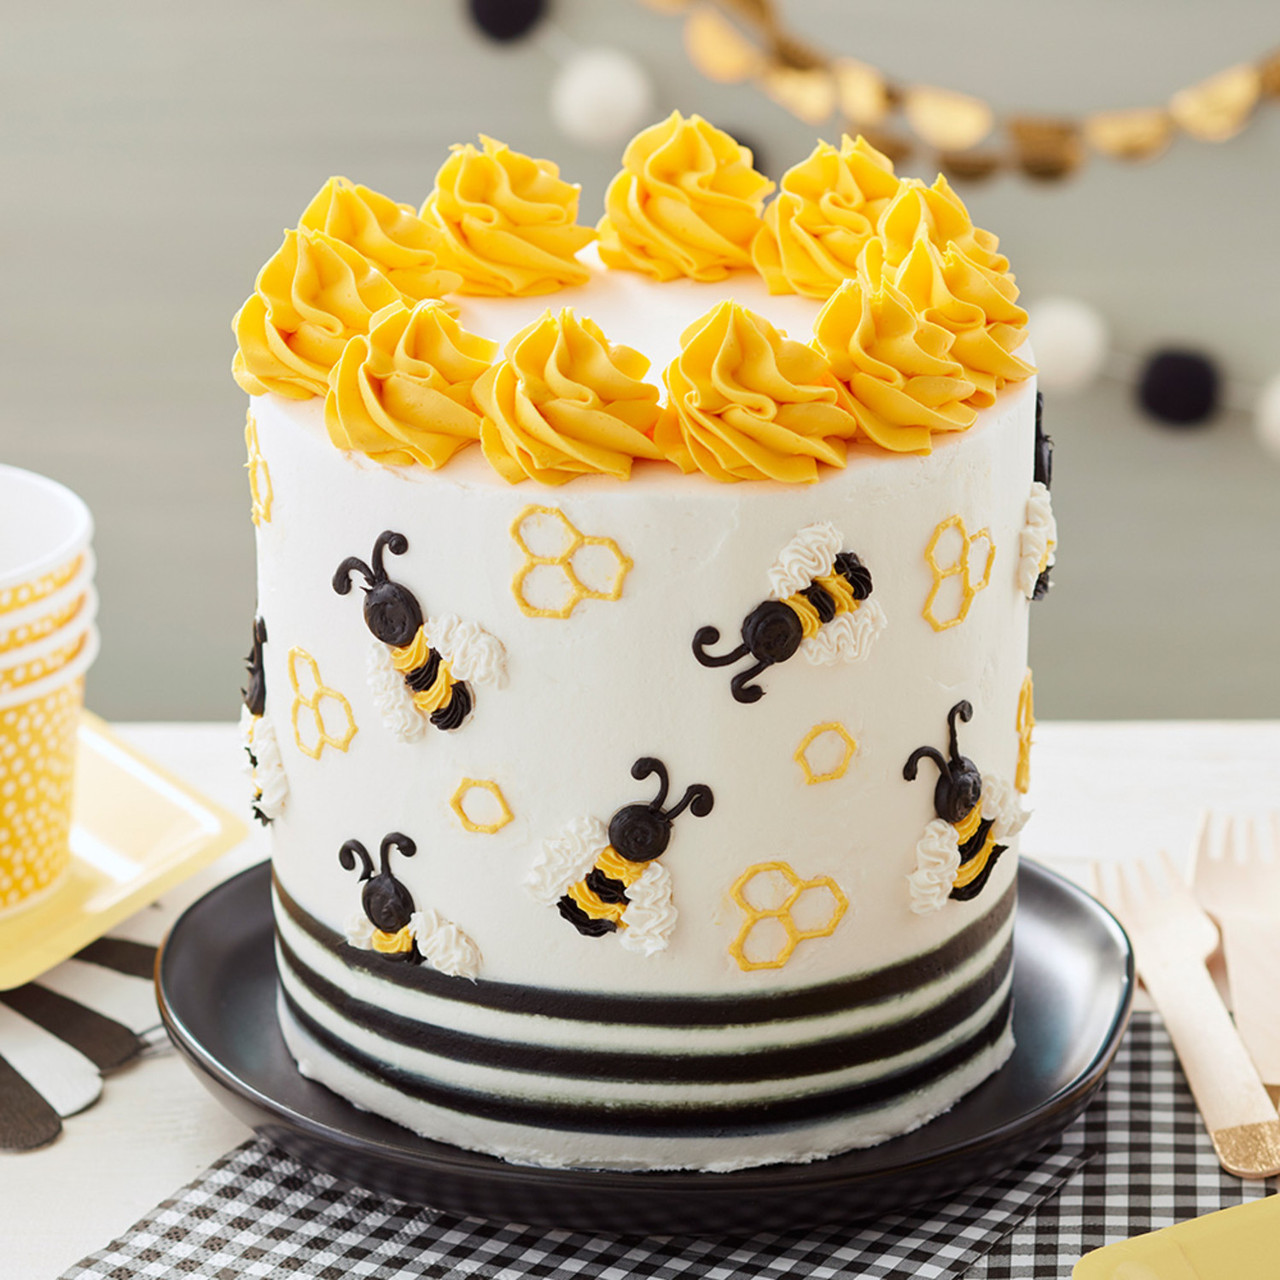 Best of the Beehive Dishes | Honey bee decor, Bee hive, Bee decor